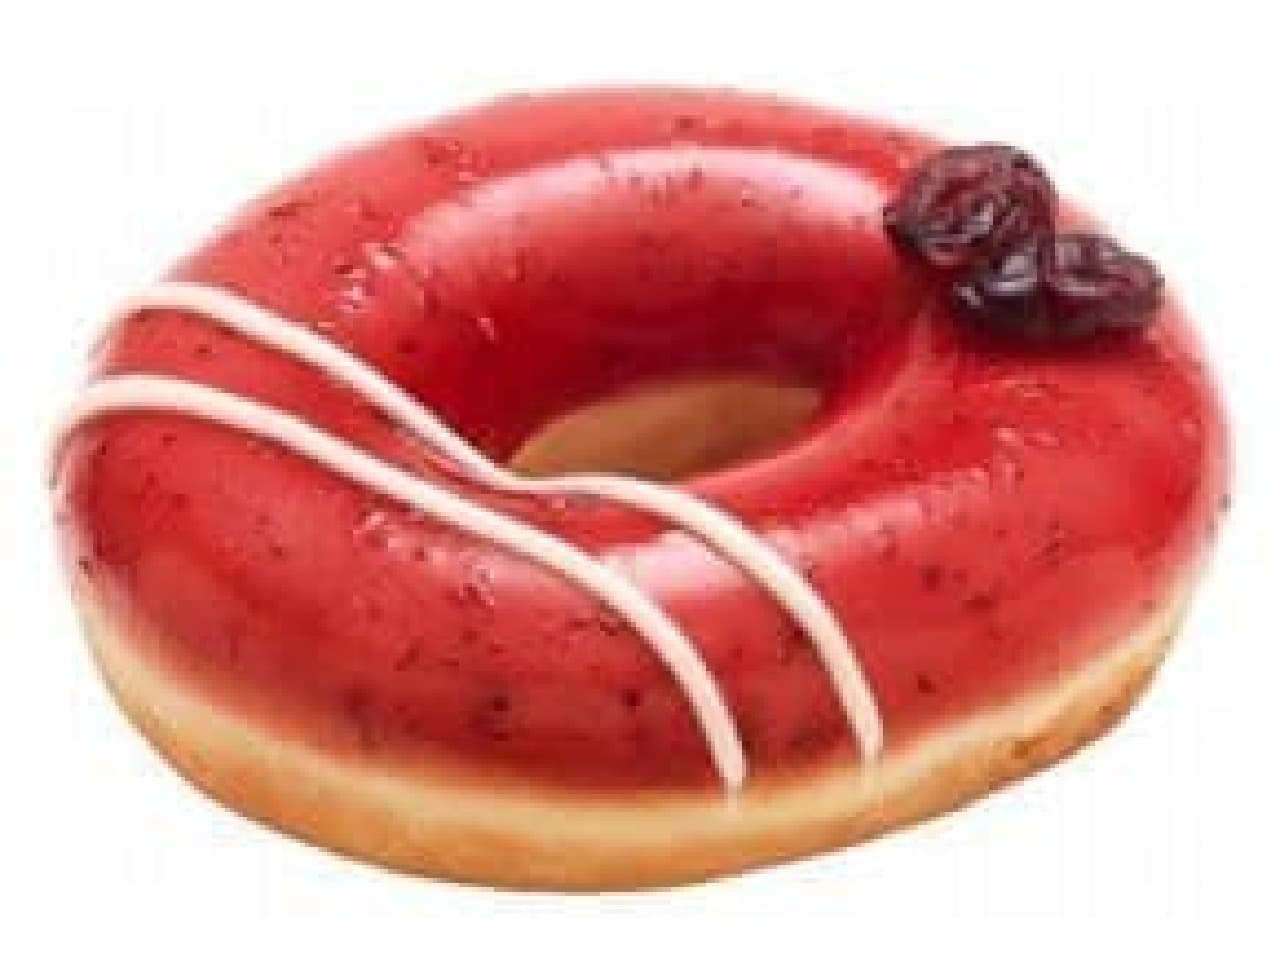 Limited time donut "Mixed Berry Jelly"